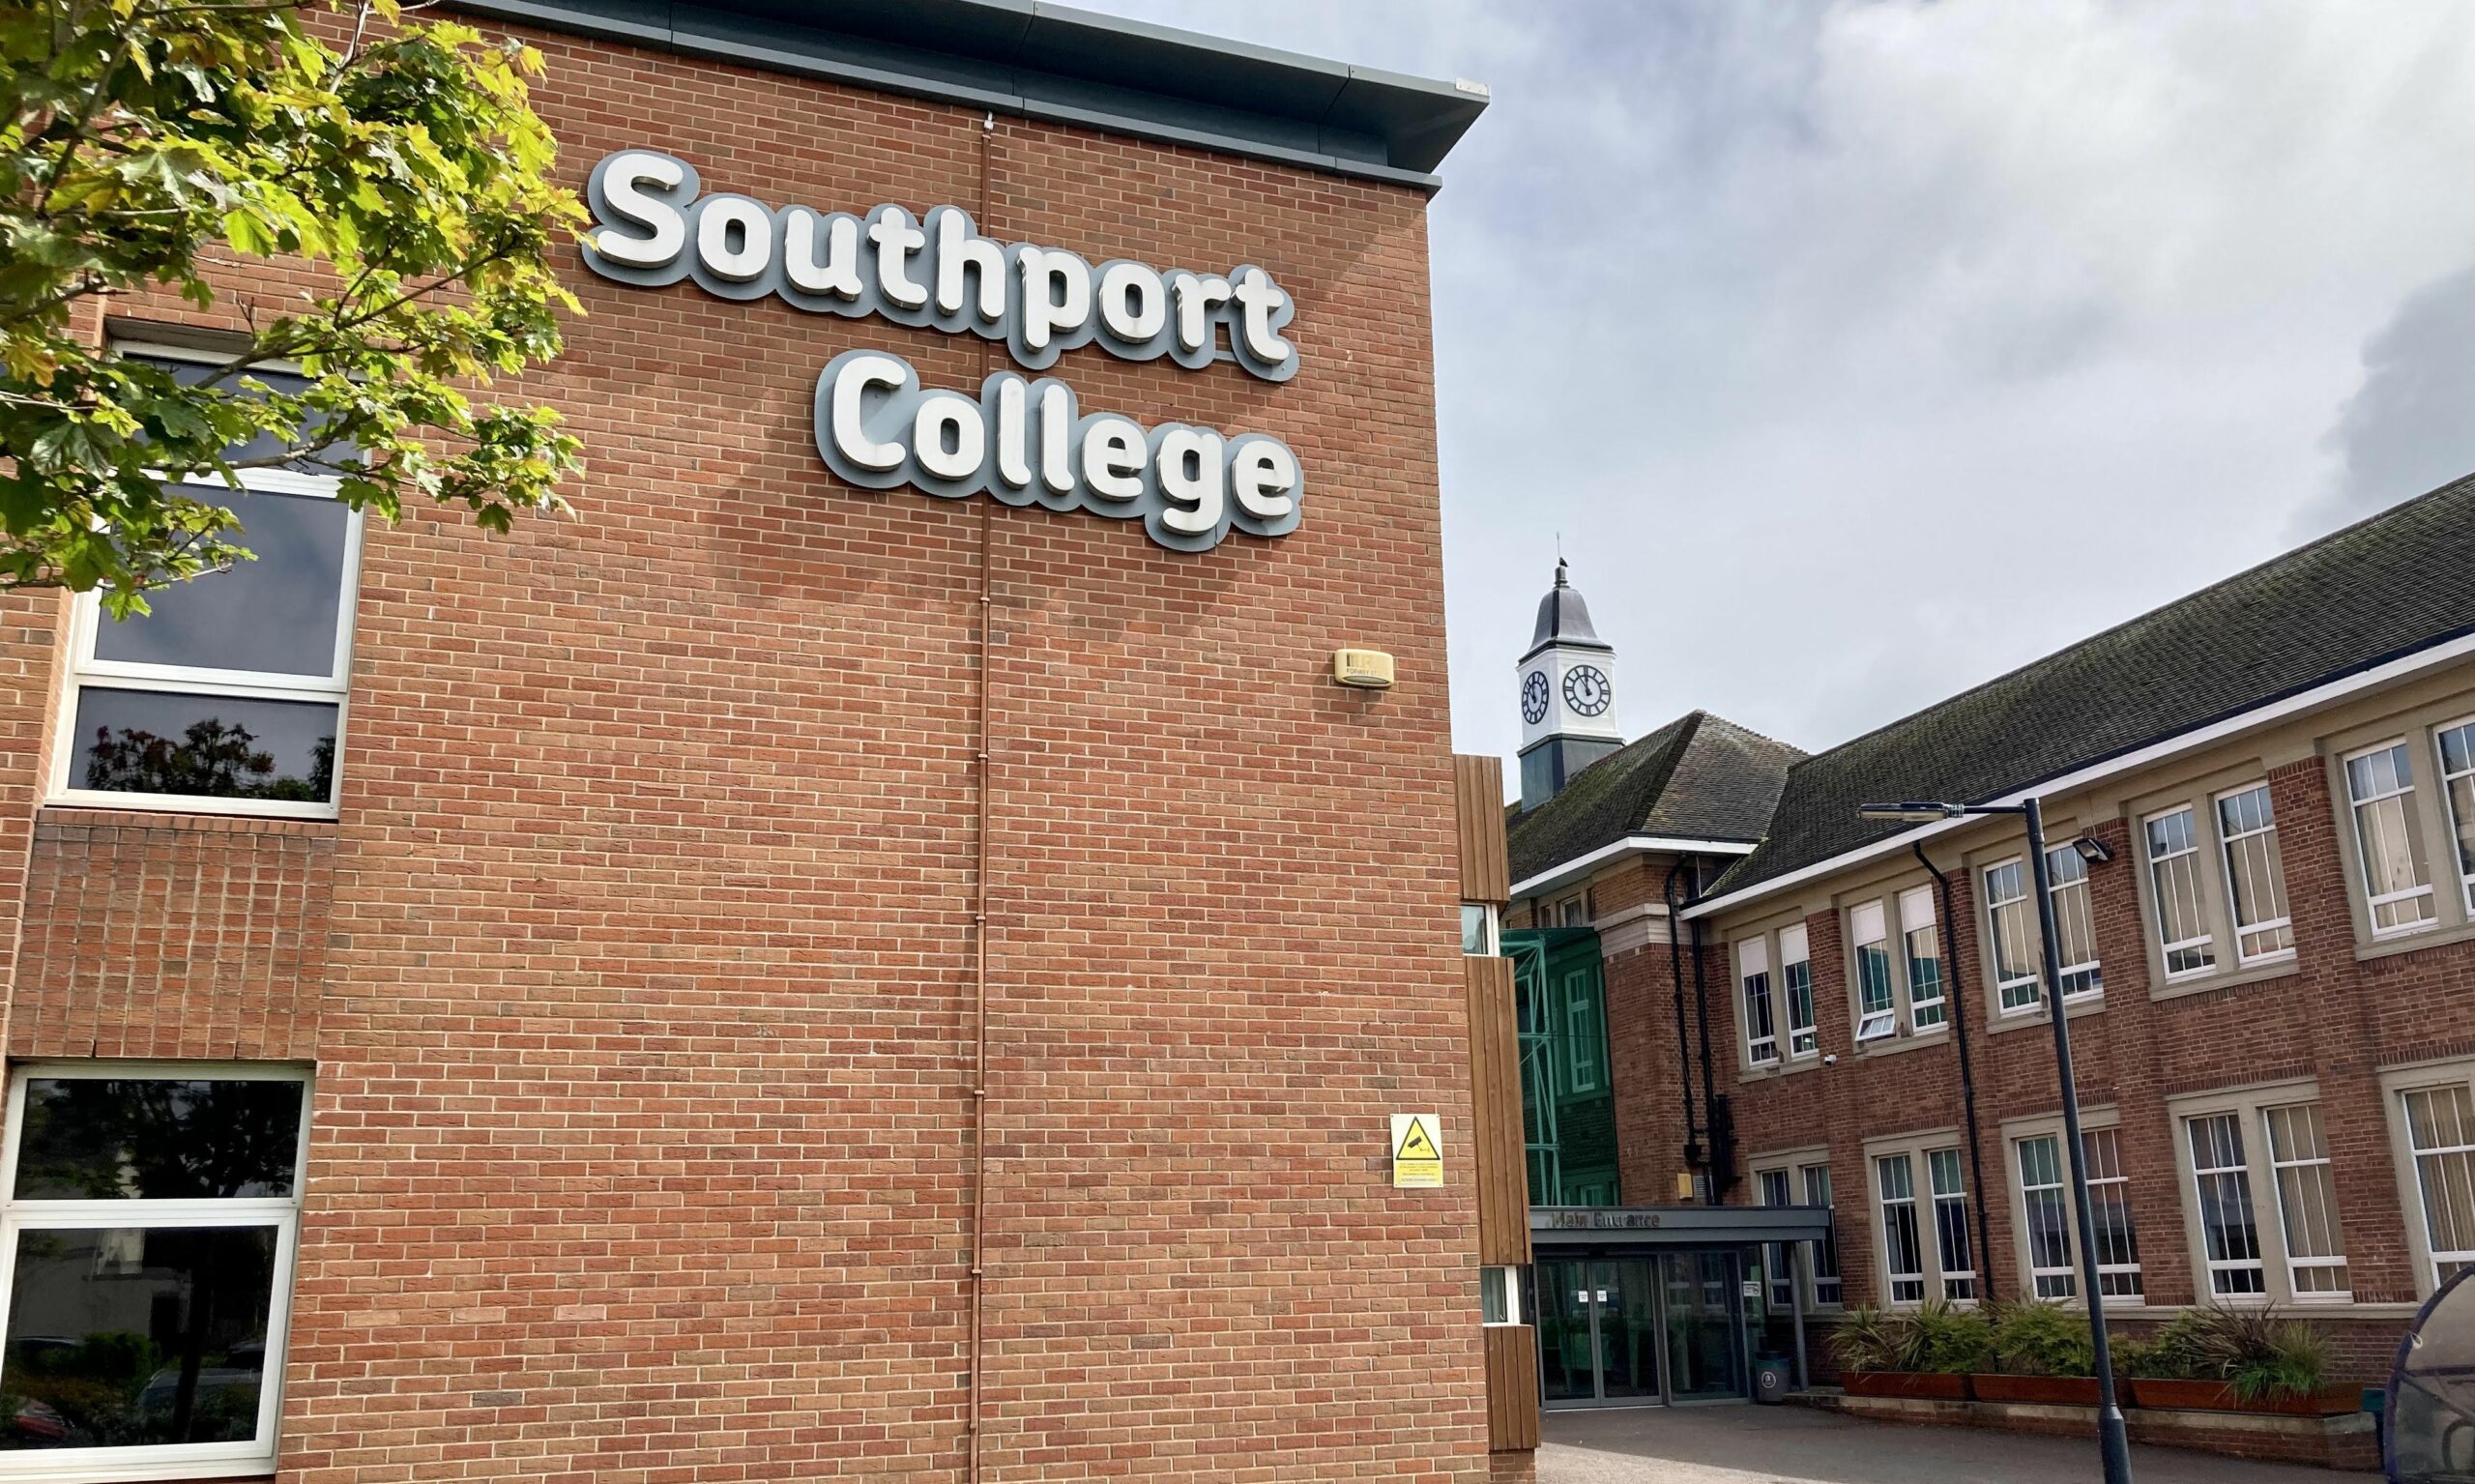 Southporr College. Photo by Andrew Brown Stand Up For Southport